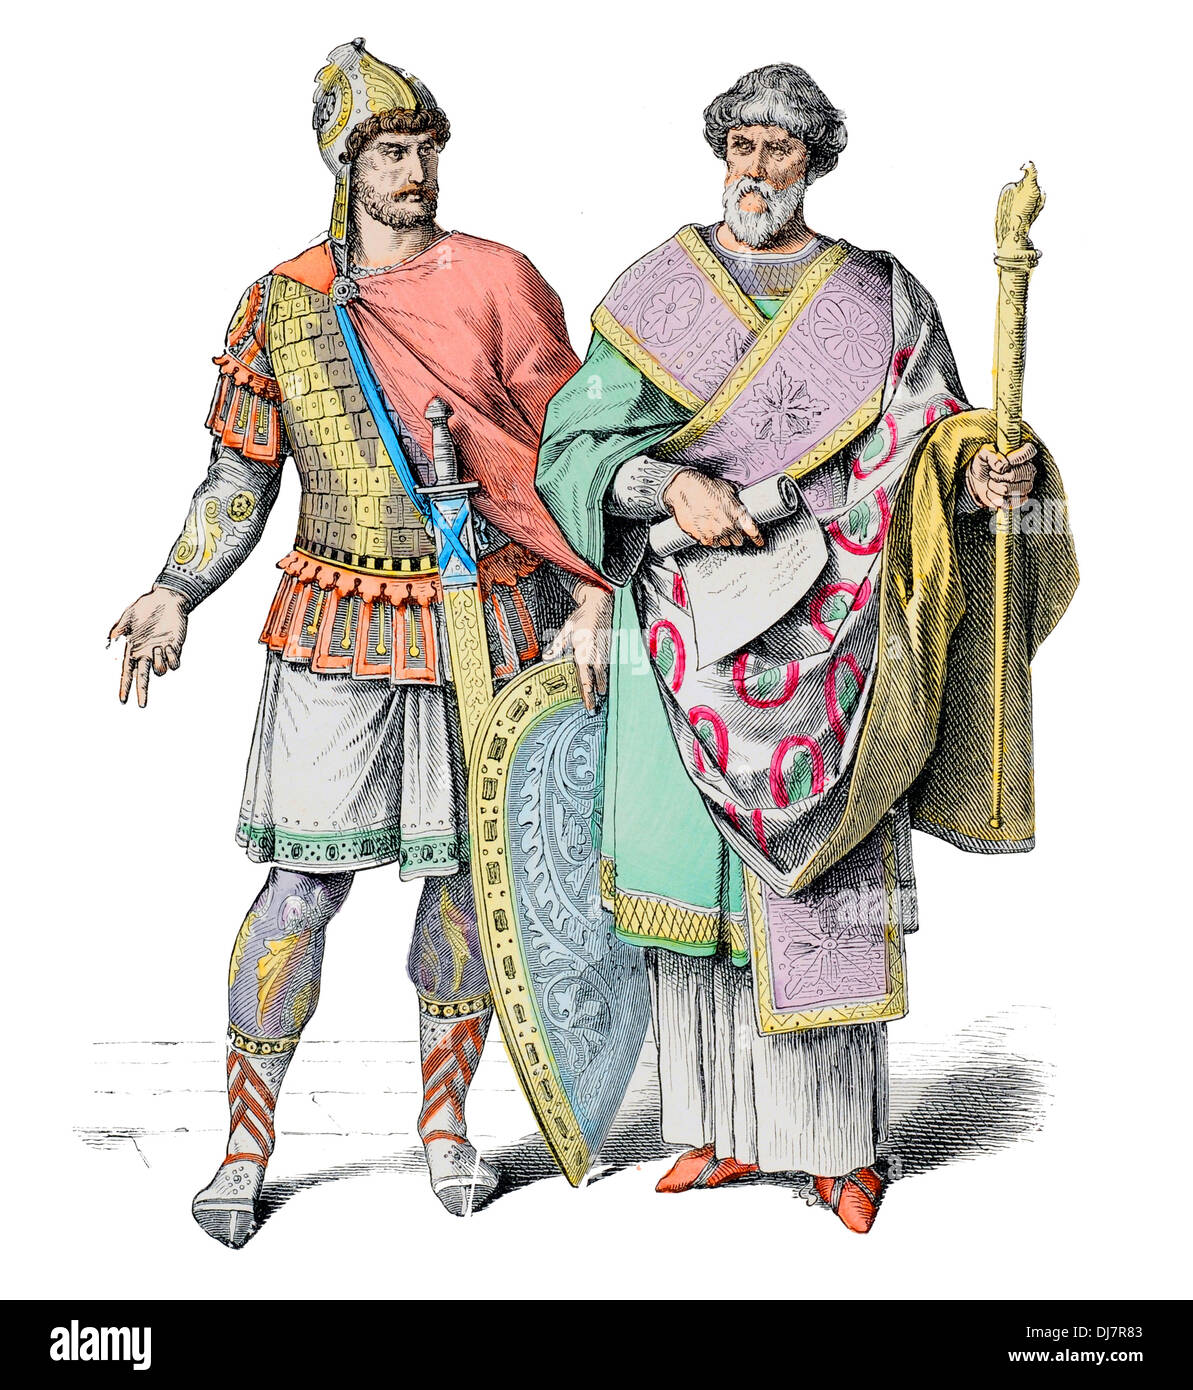 Early AD Byzantine Empire Chancellor and soldier Stock Photo